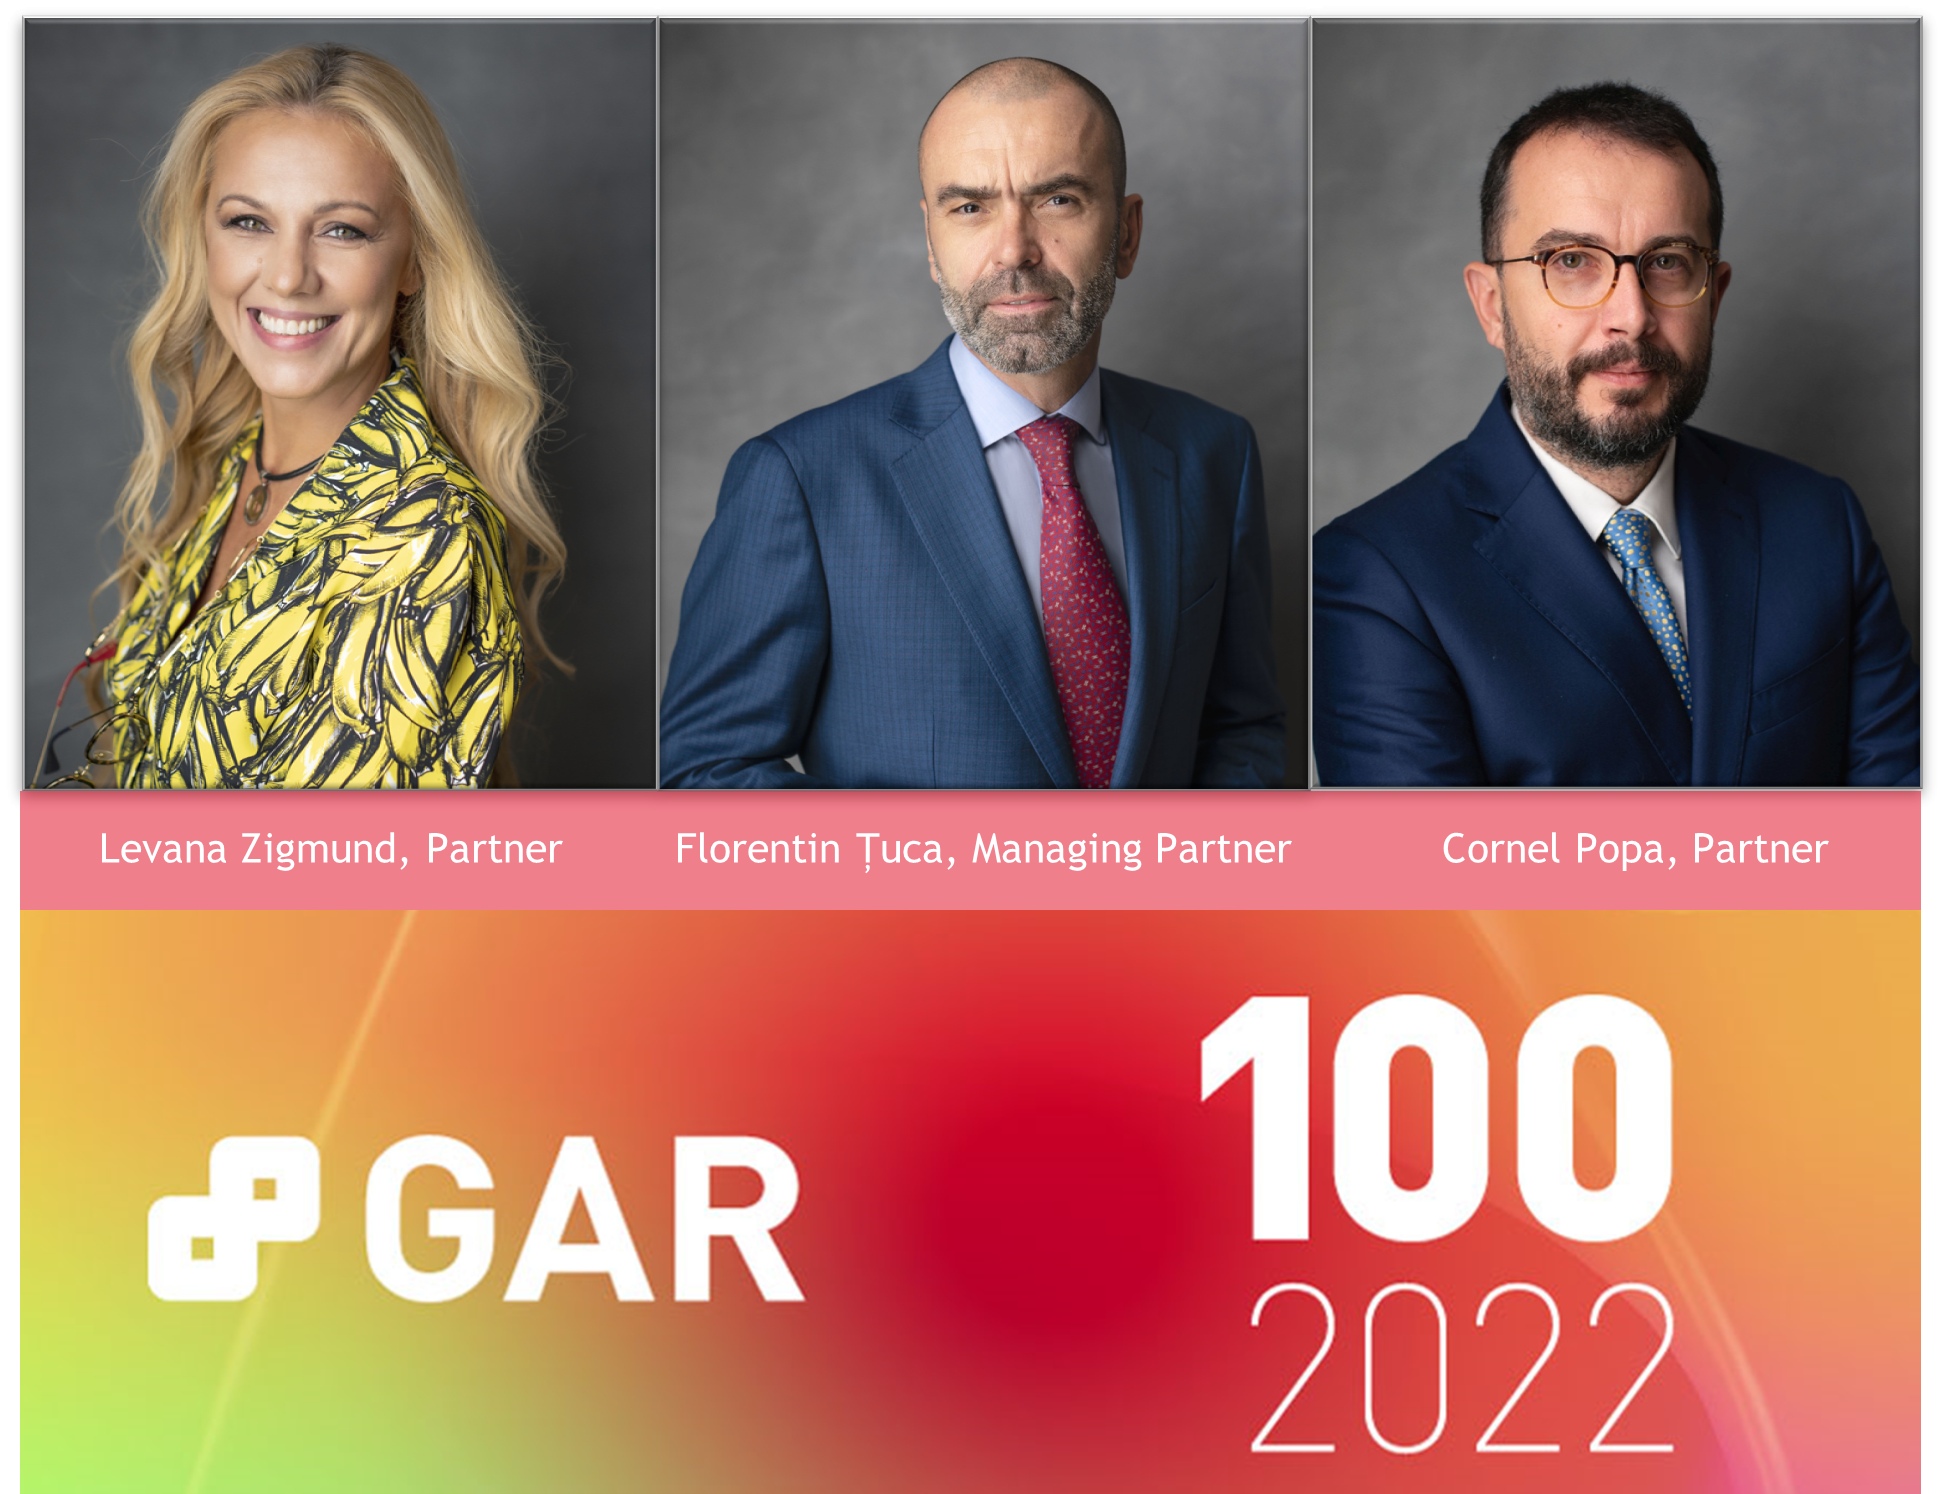 GAR 100 - 13th Edition - Global Arbitration Review